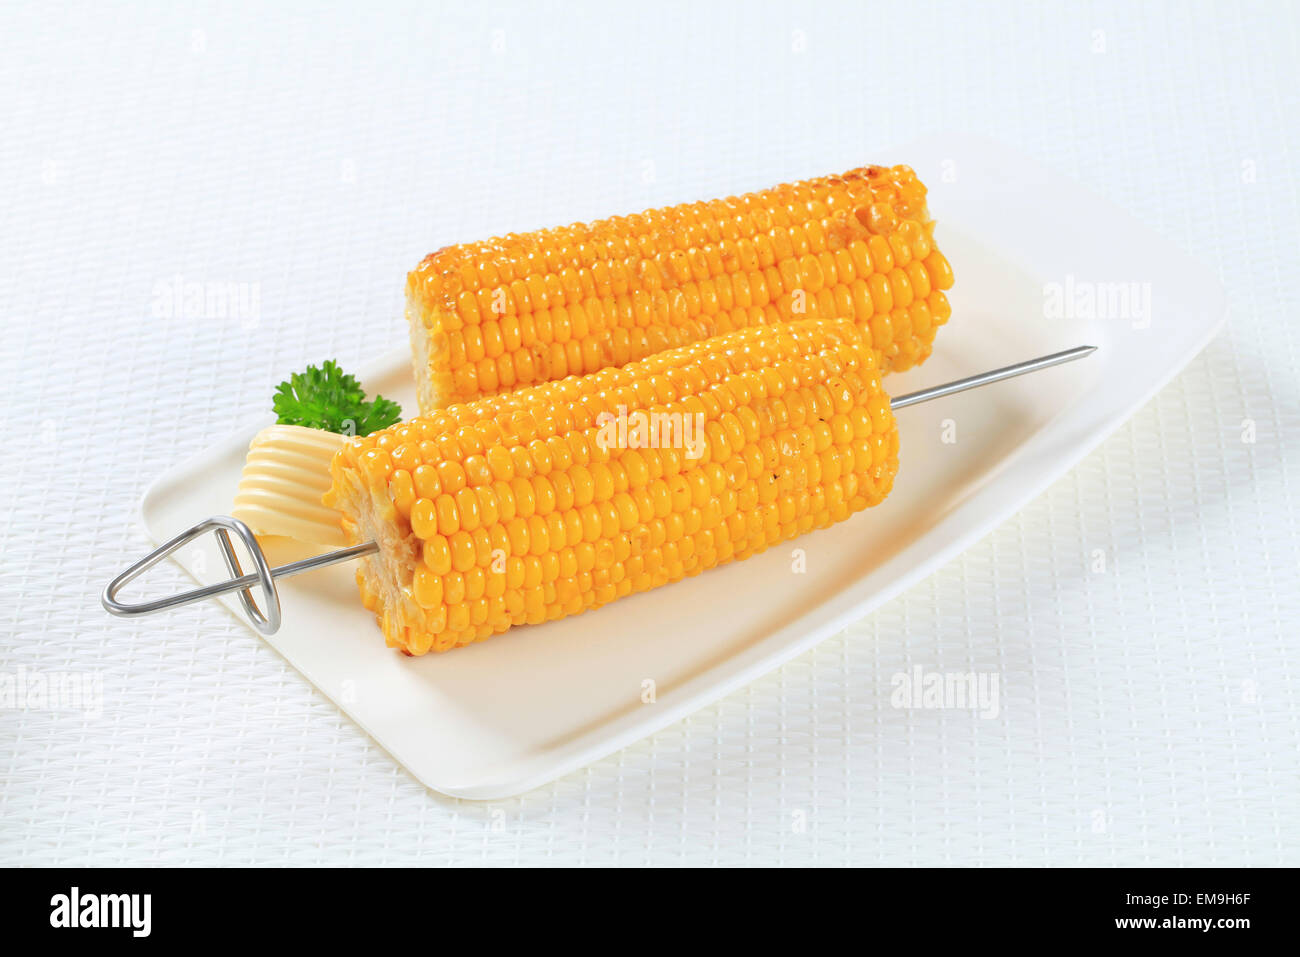 Grilled corn on the cob Stock Photo